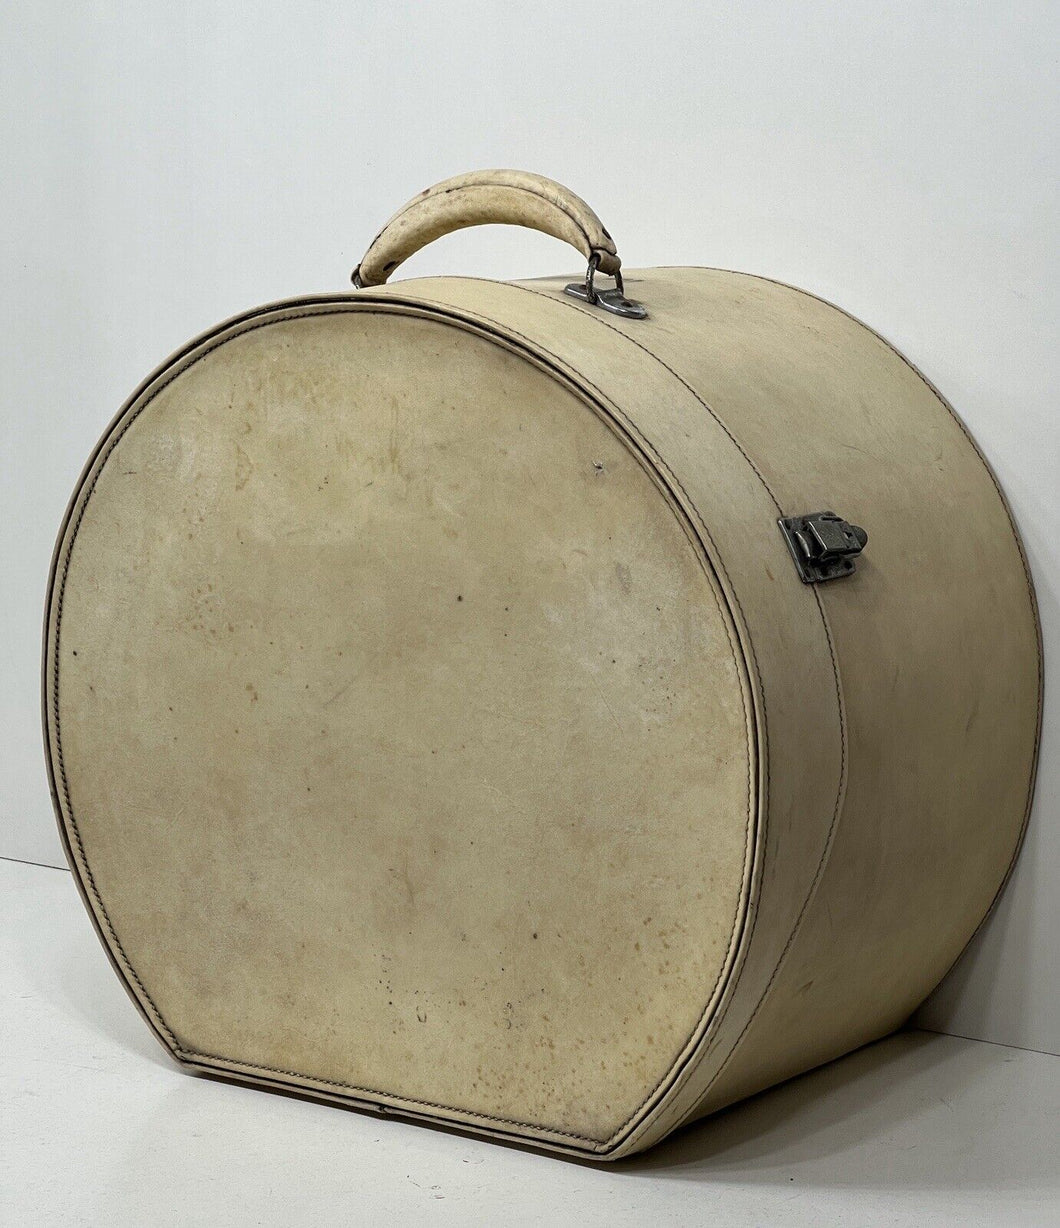 Stunning vintage vellum leather travelling hat box cruising case by THE TRINITY